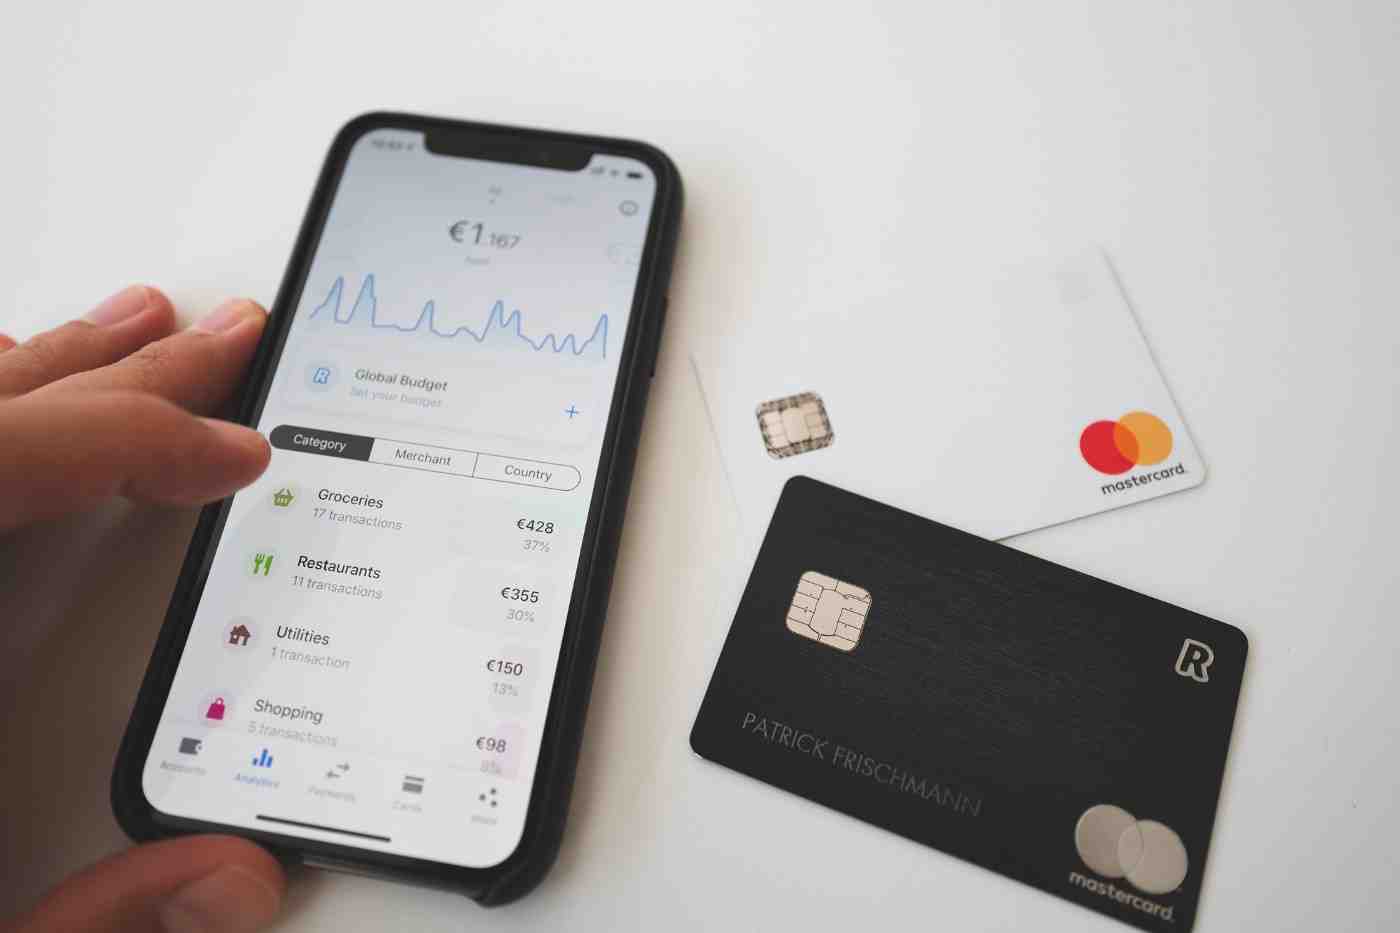 What type of account is Revolut?